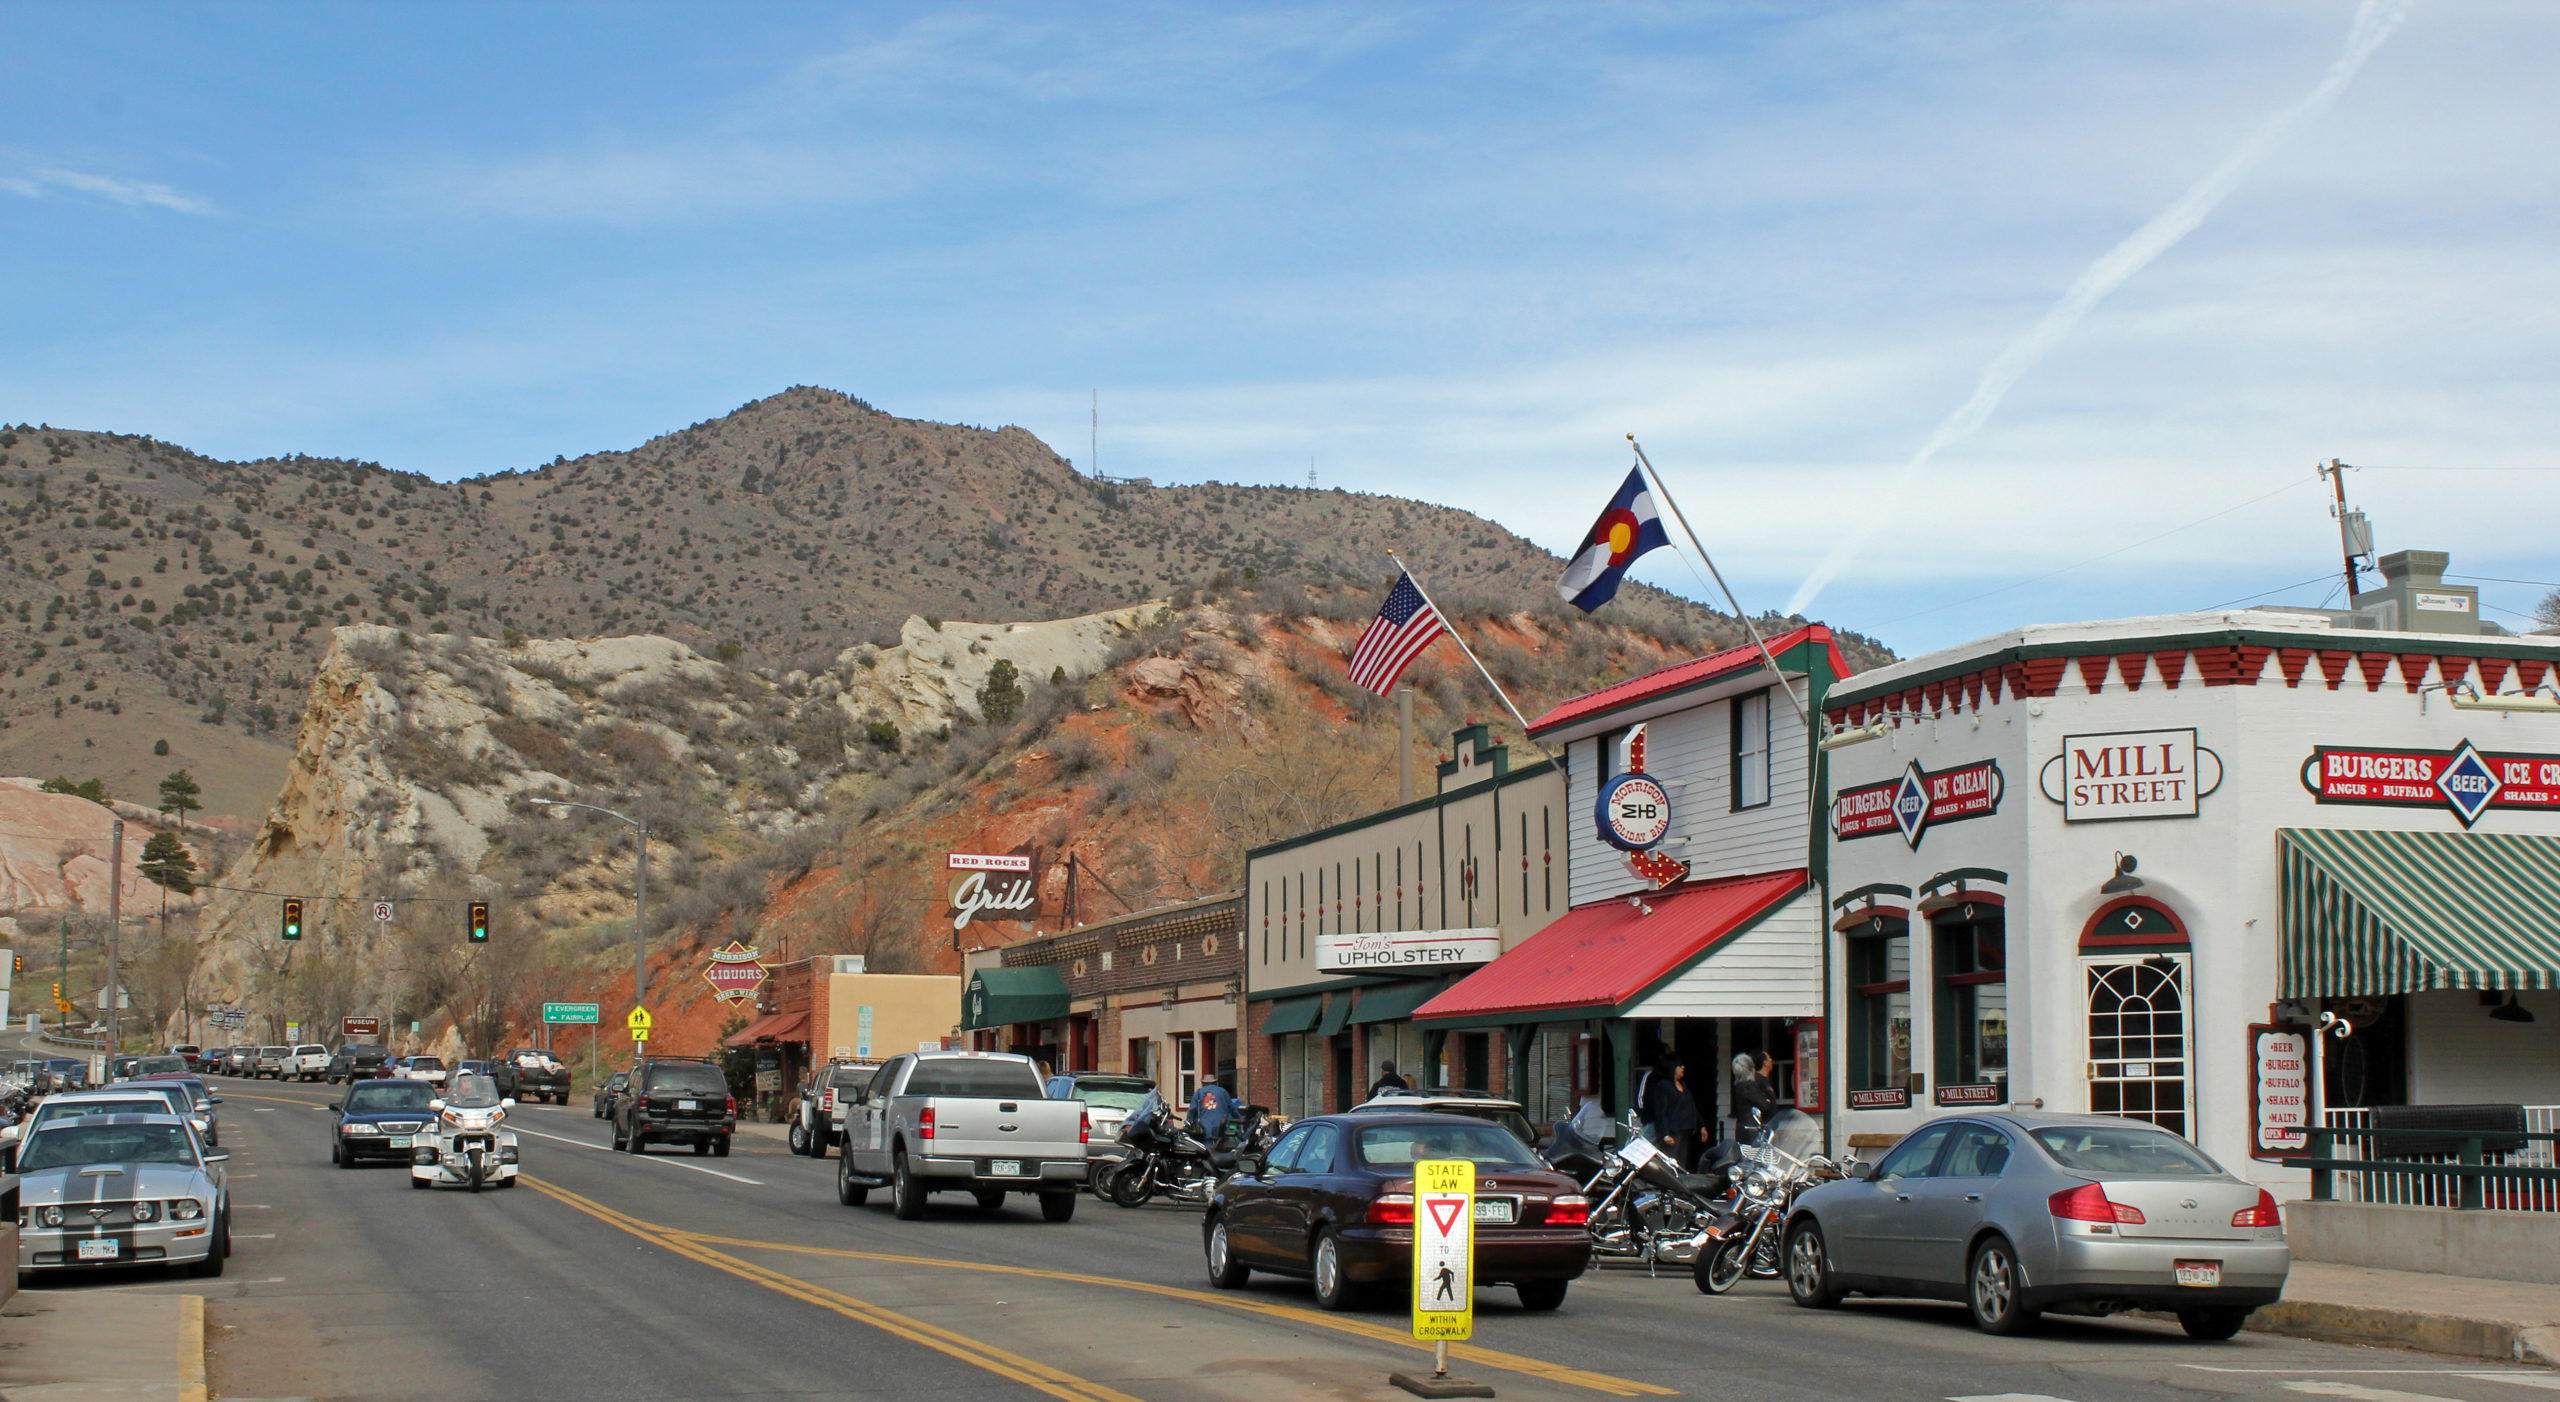 View of the historic district of the town of Morrison, Colorado with historic buildings that house shops and restaurants with mountains in the distance.